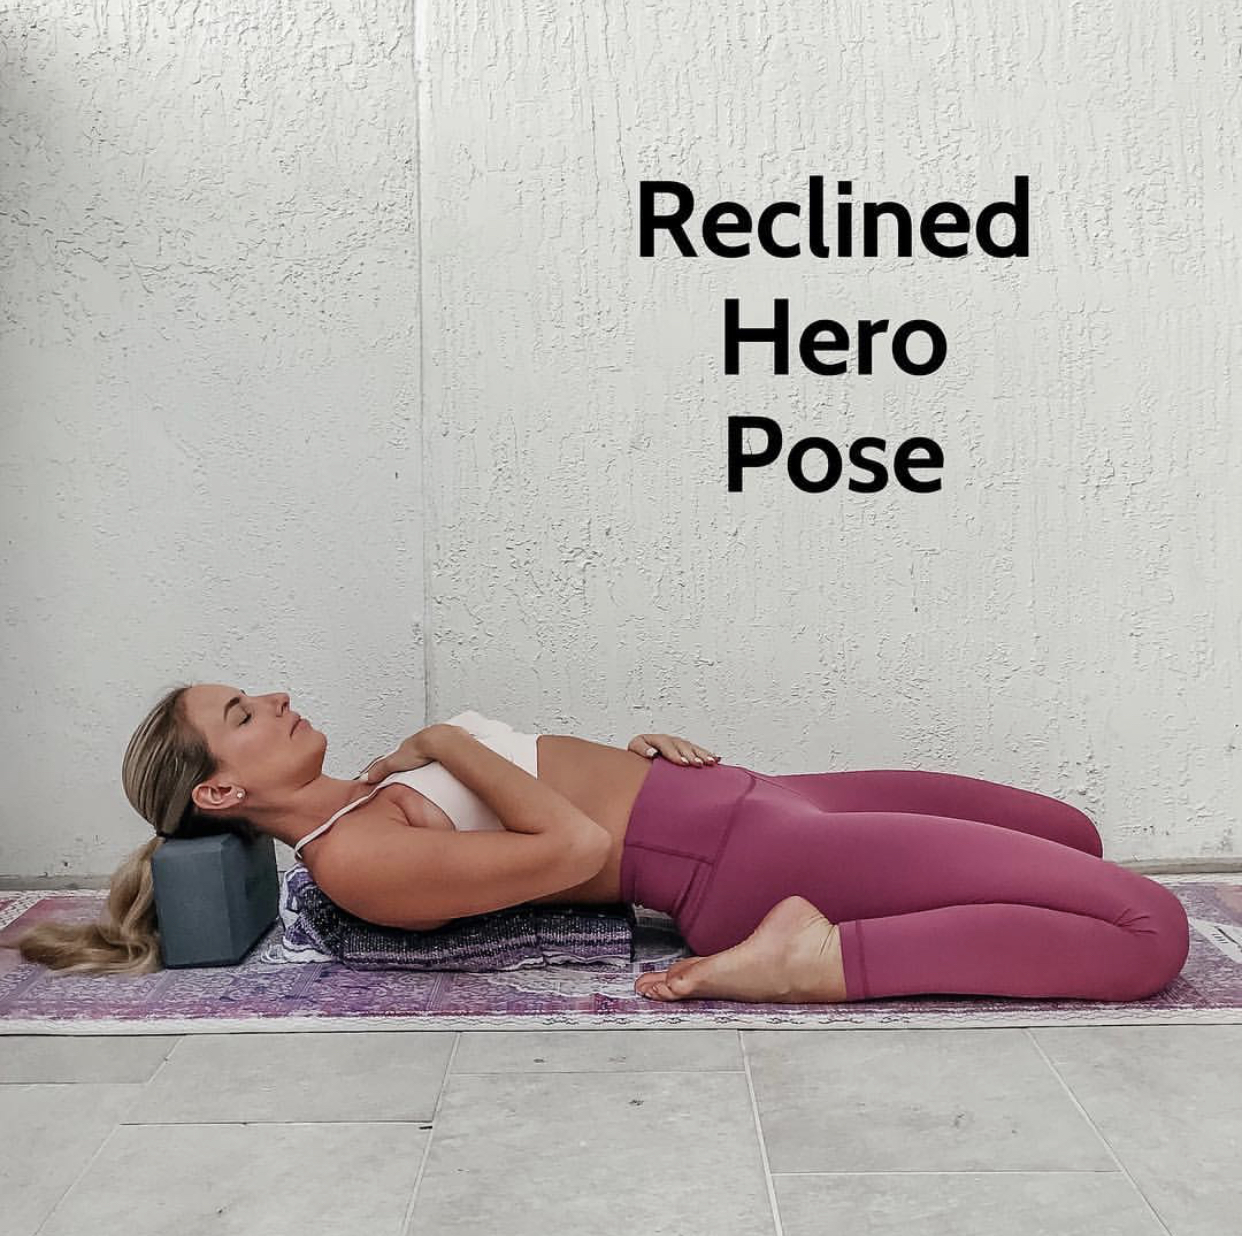  Reclined Hero Pose x 1 min-3 min. Place a rolled up blanket behind your spine to make this more restorative! 